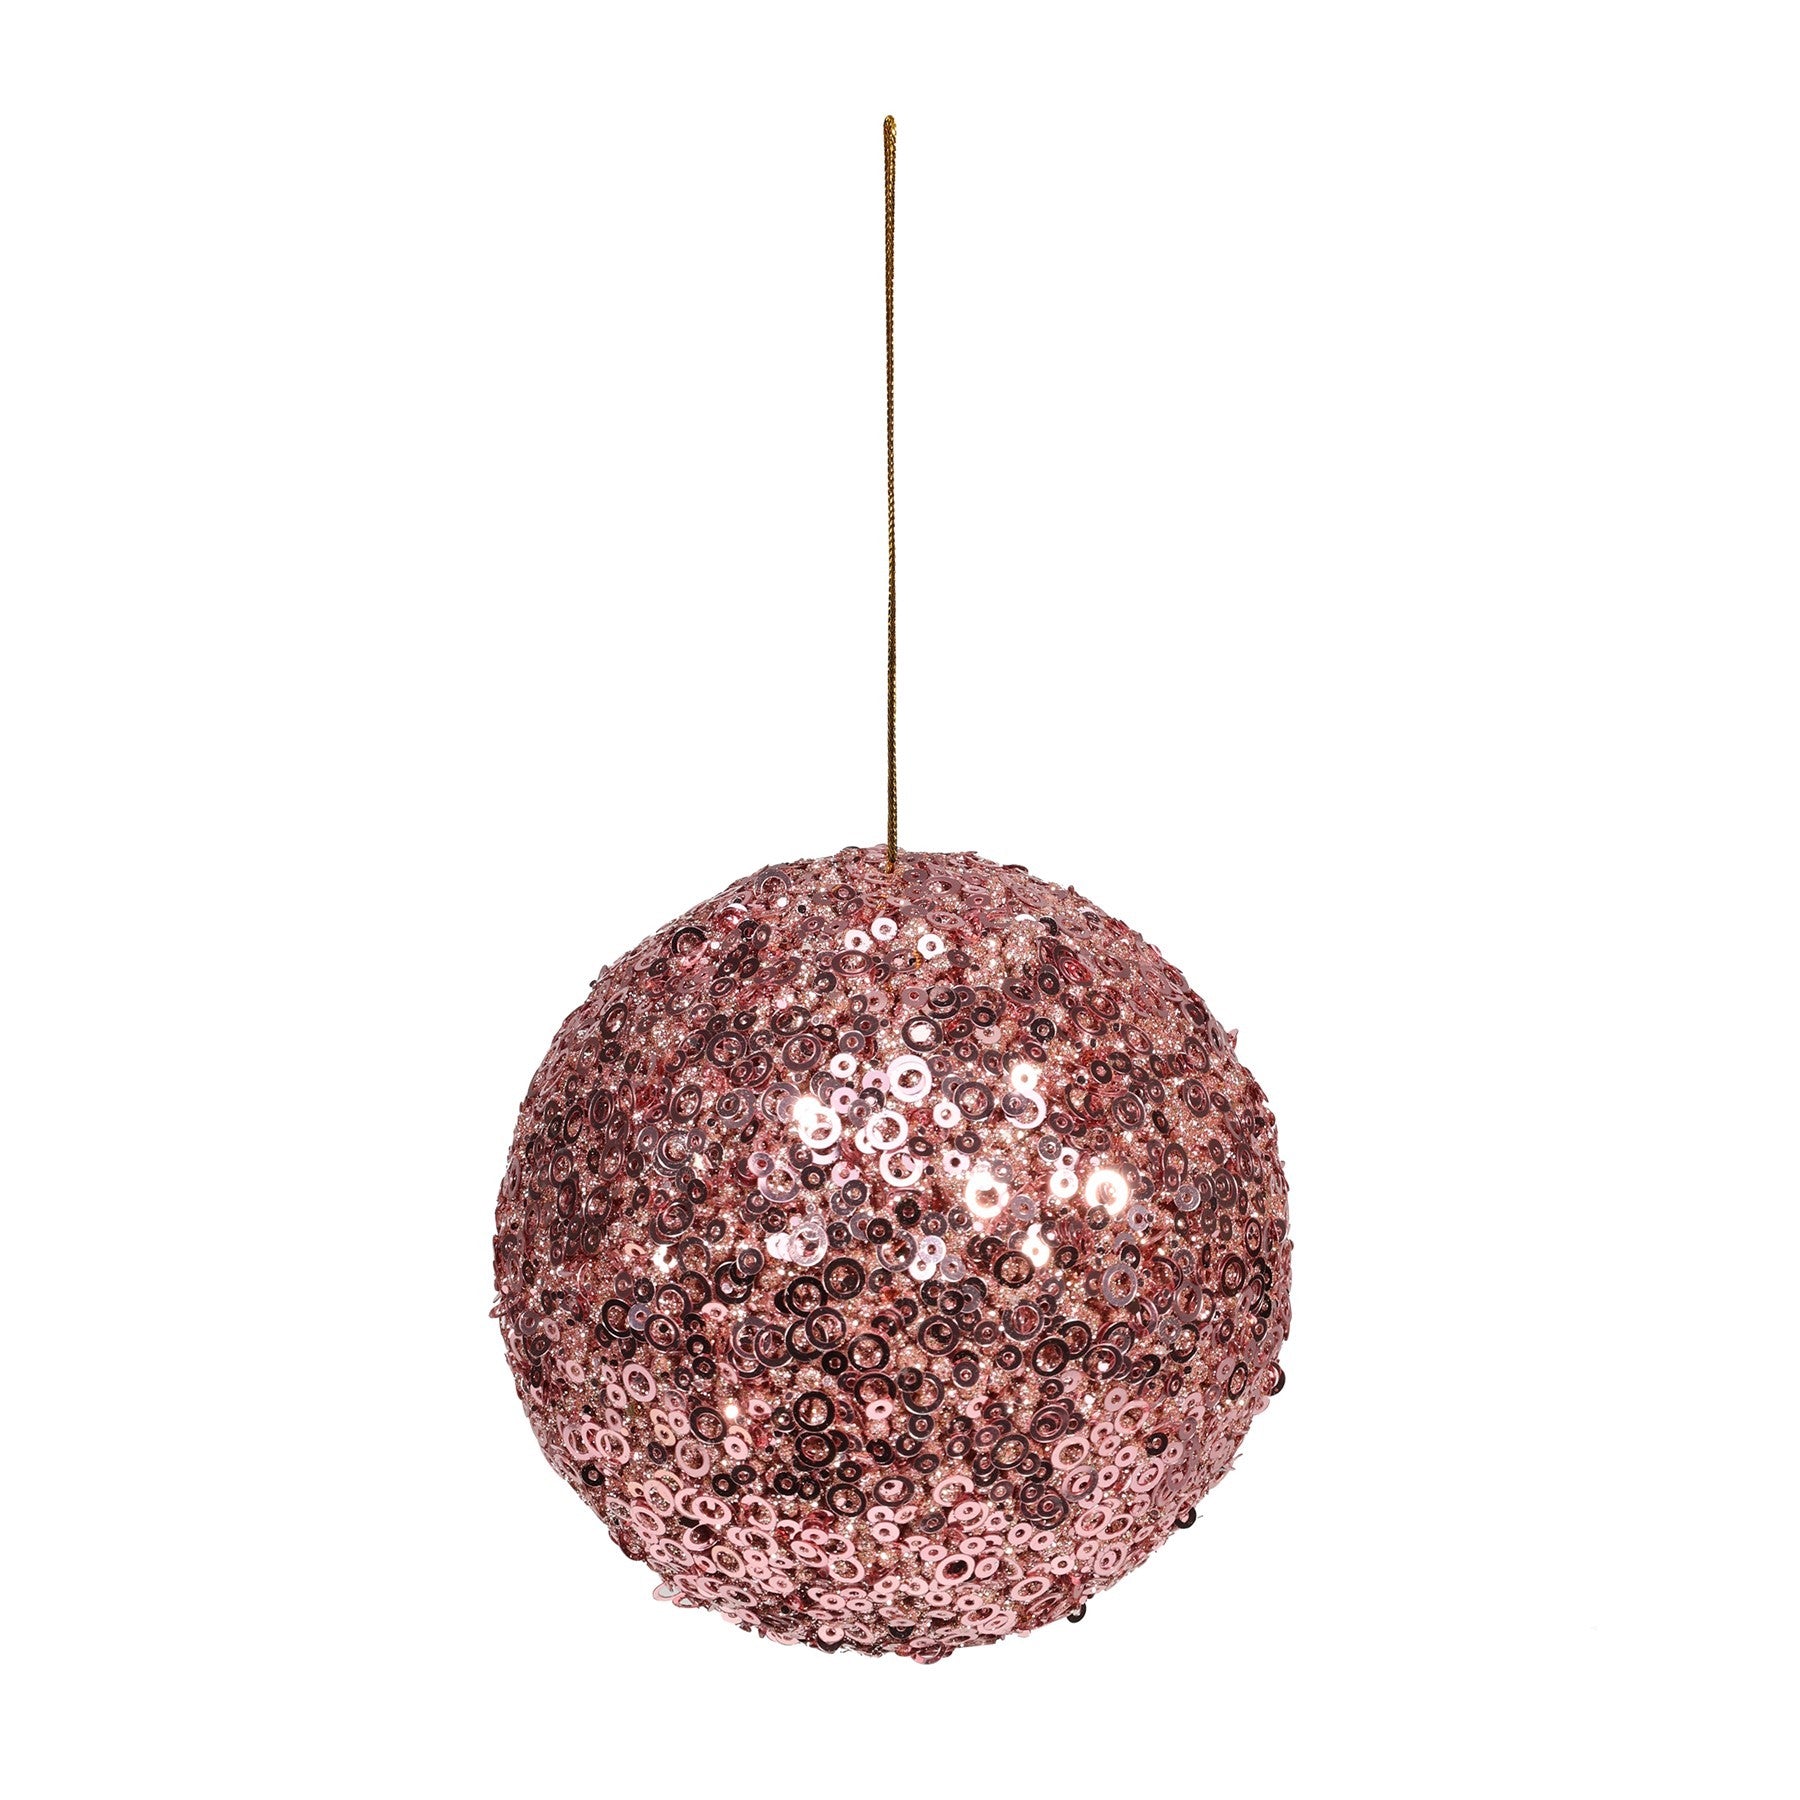 View Pretty in Pink Glitter Bauble Dia12cm information